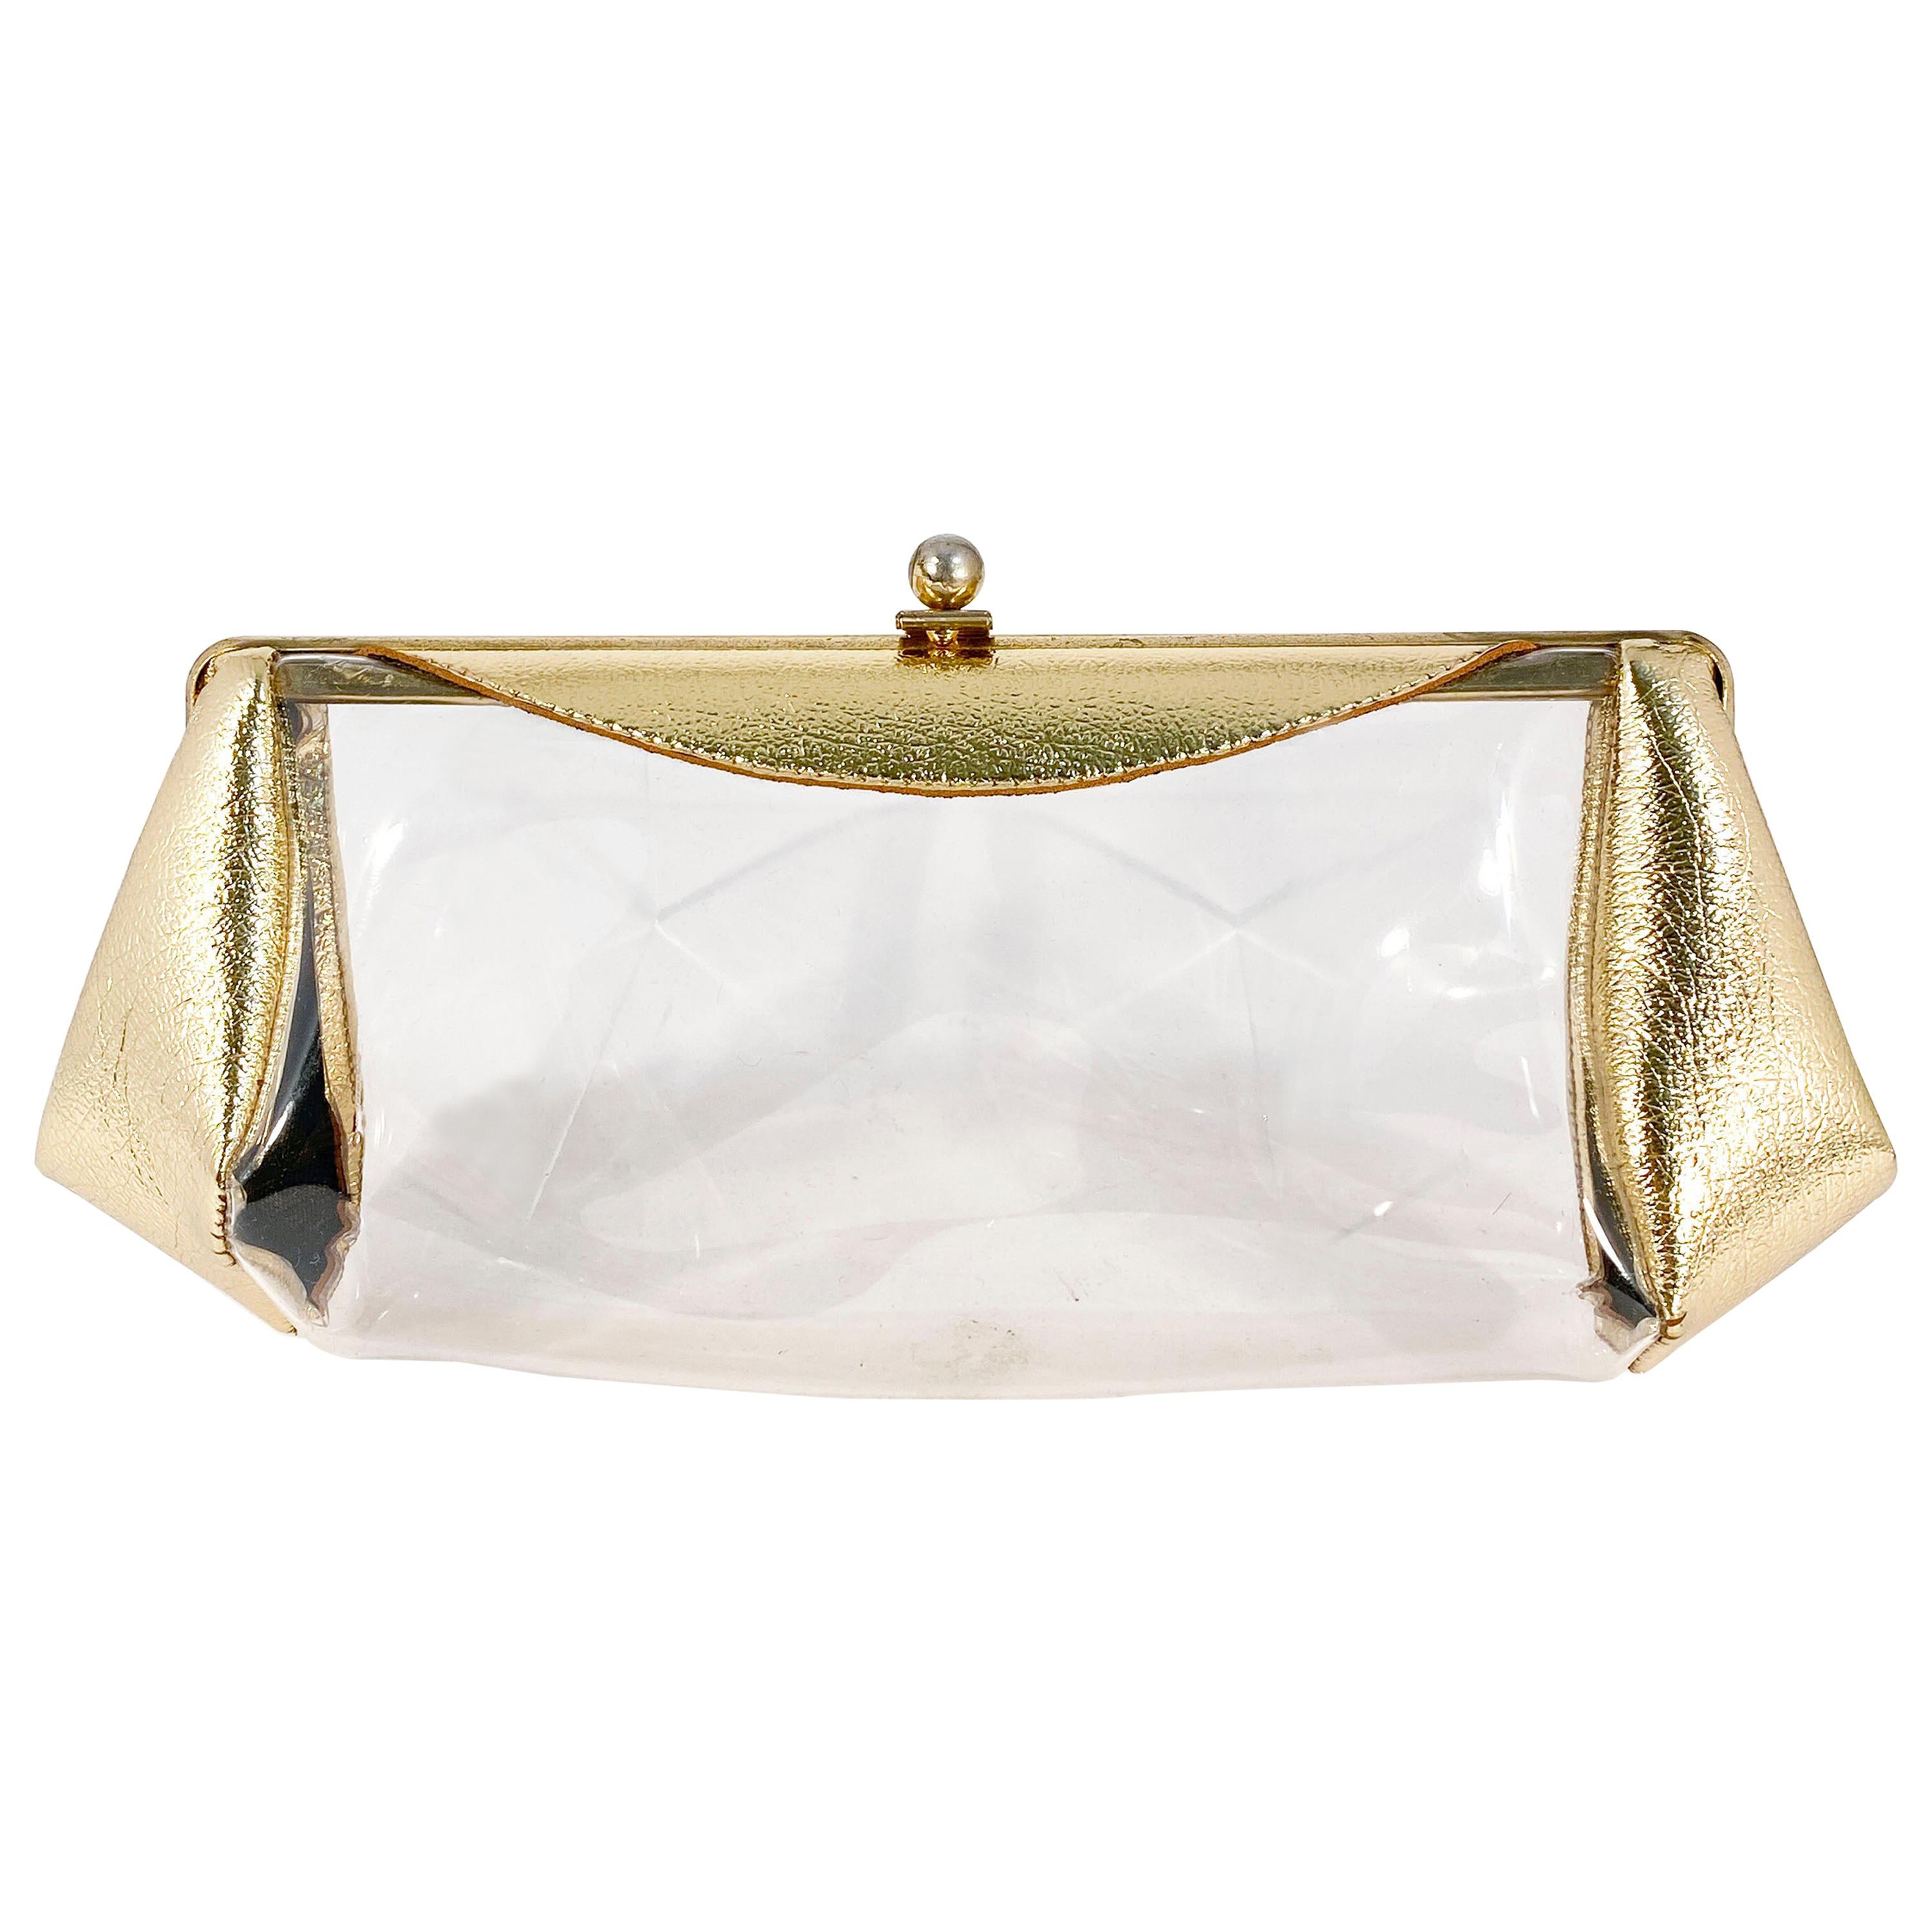 1950s Metallic Gold and Clear Plastic Clutch